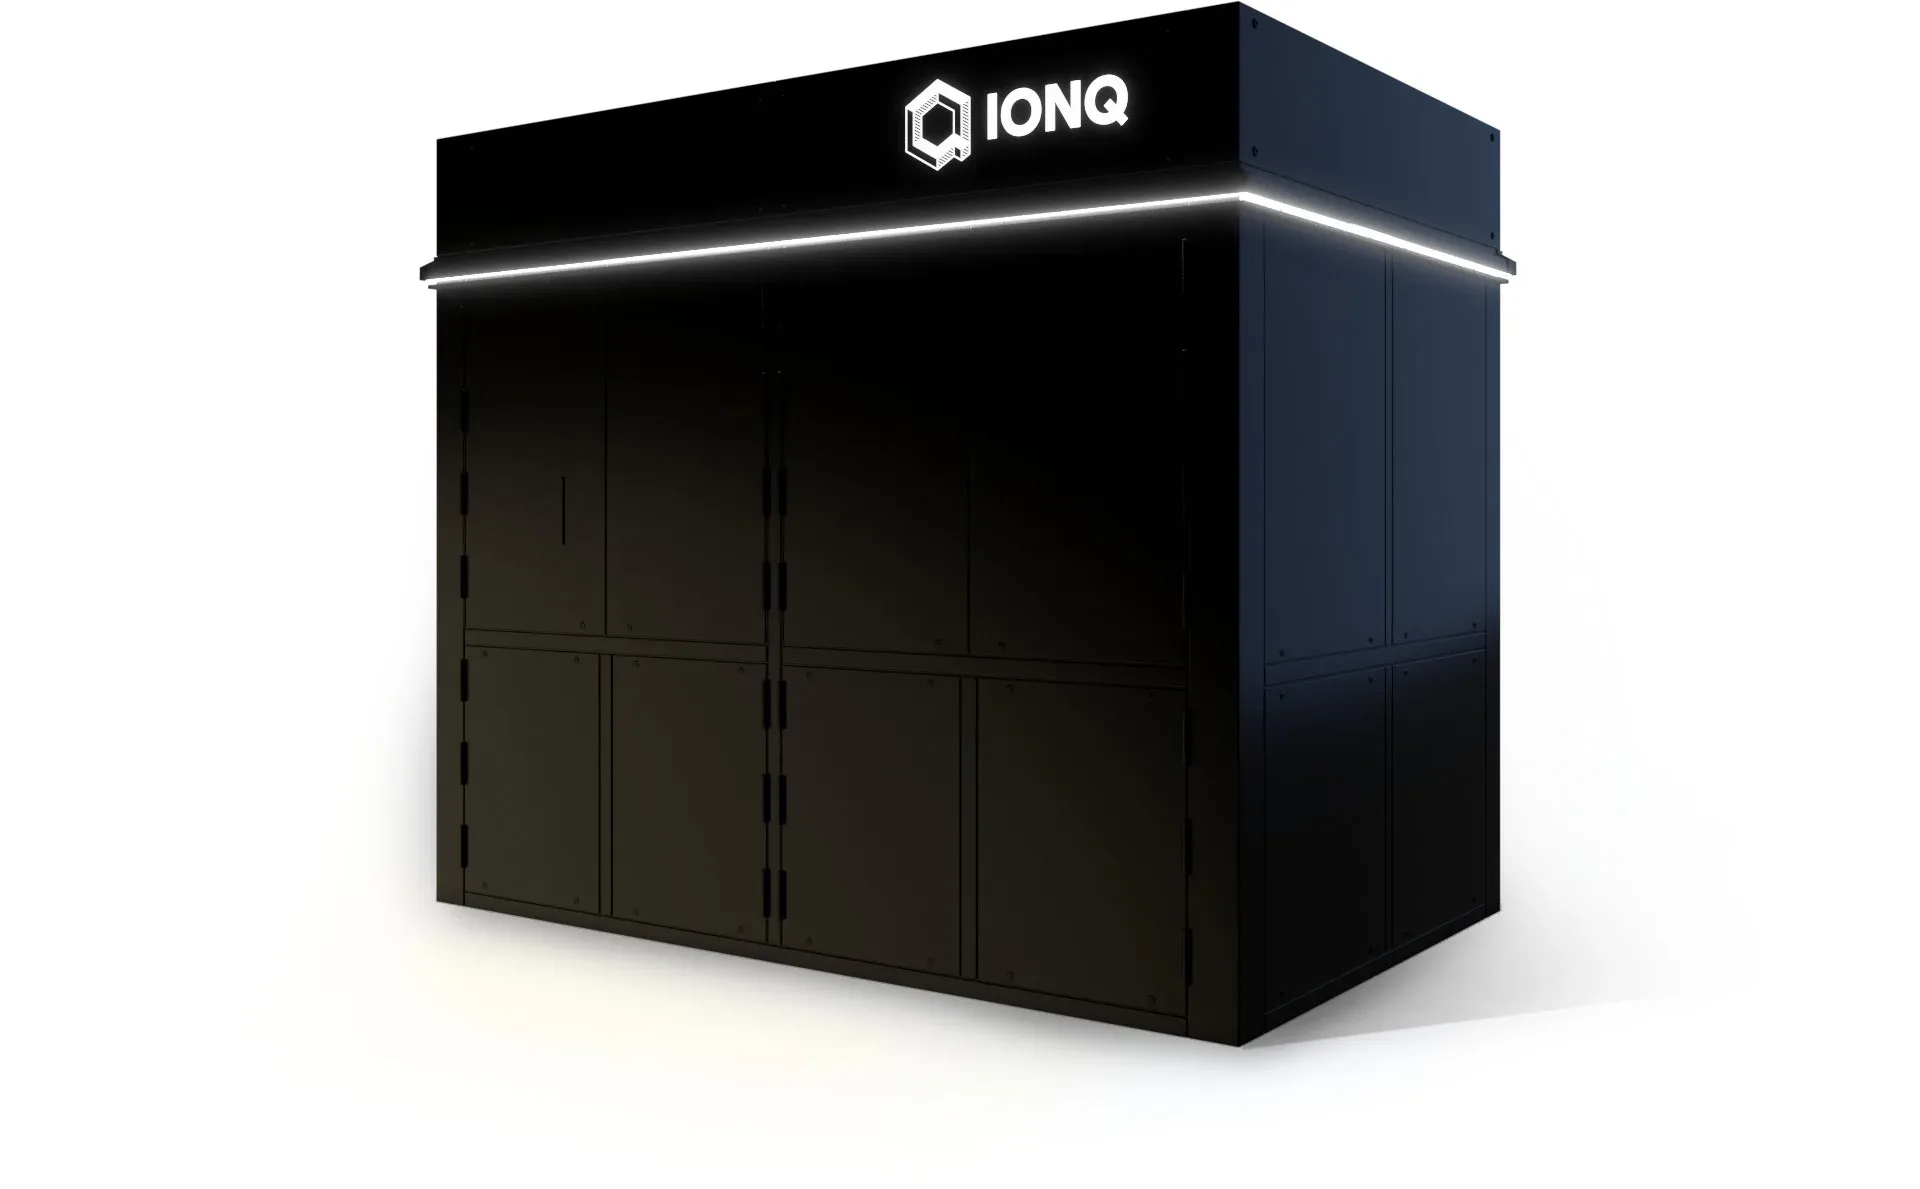 Ionq Started Research Credits Program To Kick Start The Race For Quantum Platform Territory